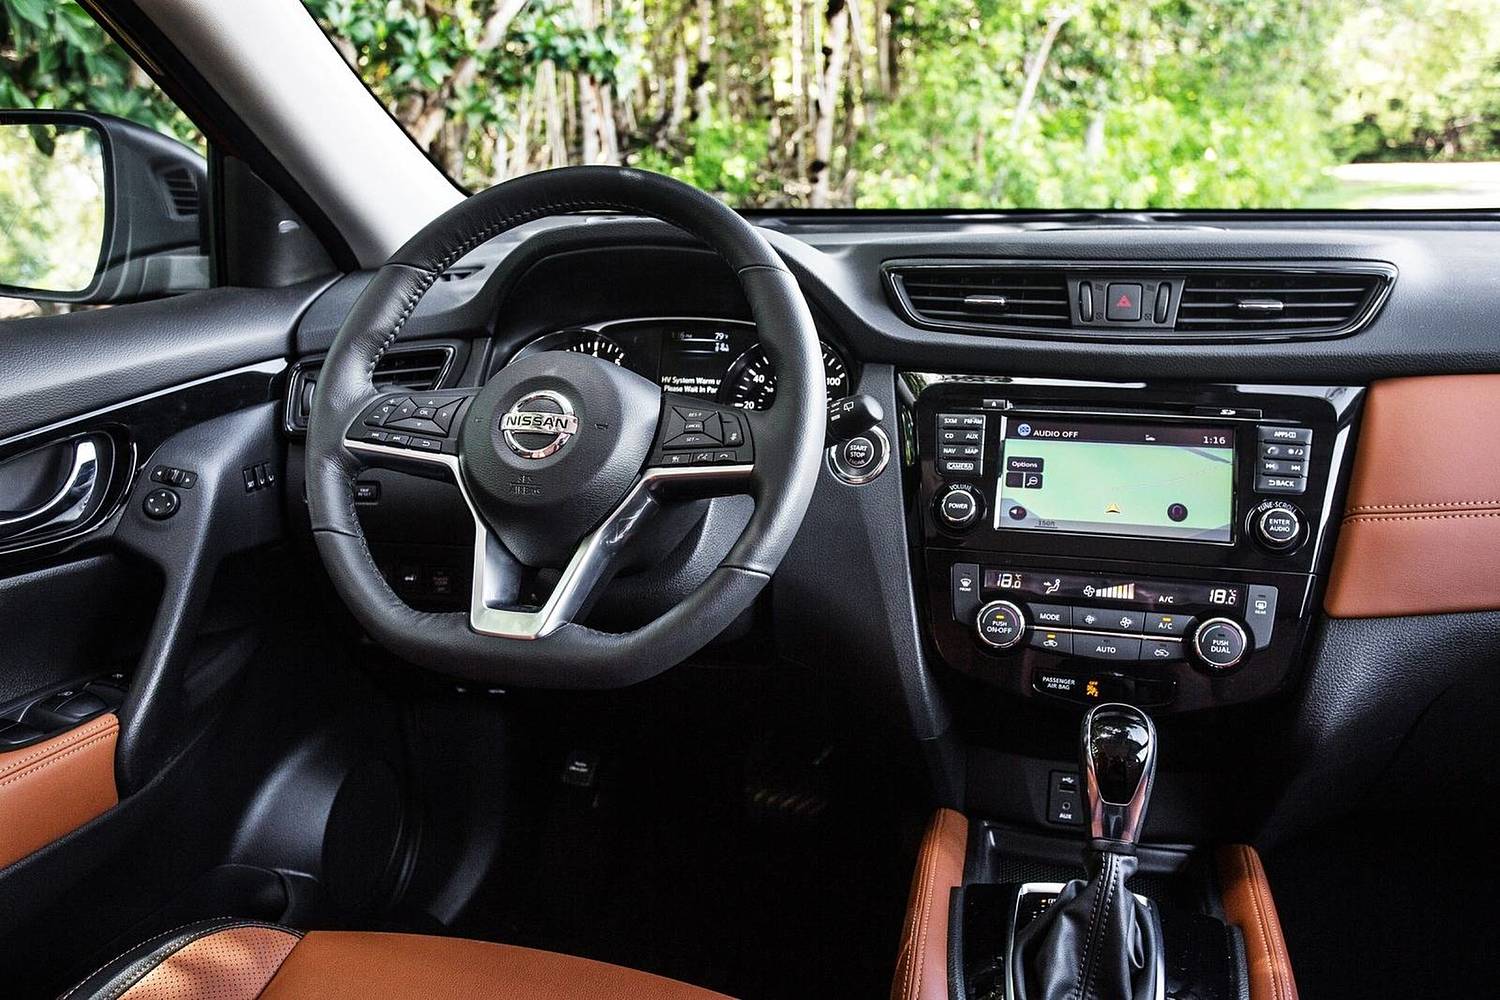 Nissan Rogue SL 4dr SUV Steering Wheel Detail. Platinum Reserve Package Shown. (2017 model year shown)